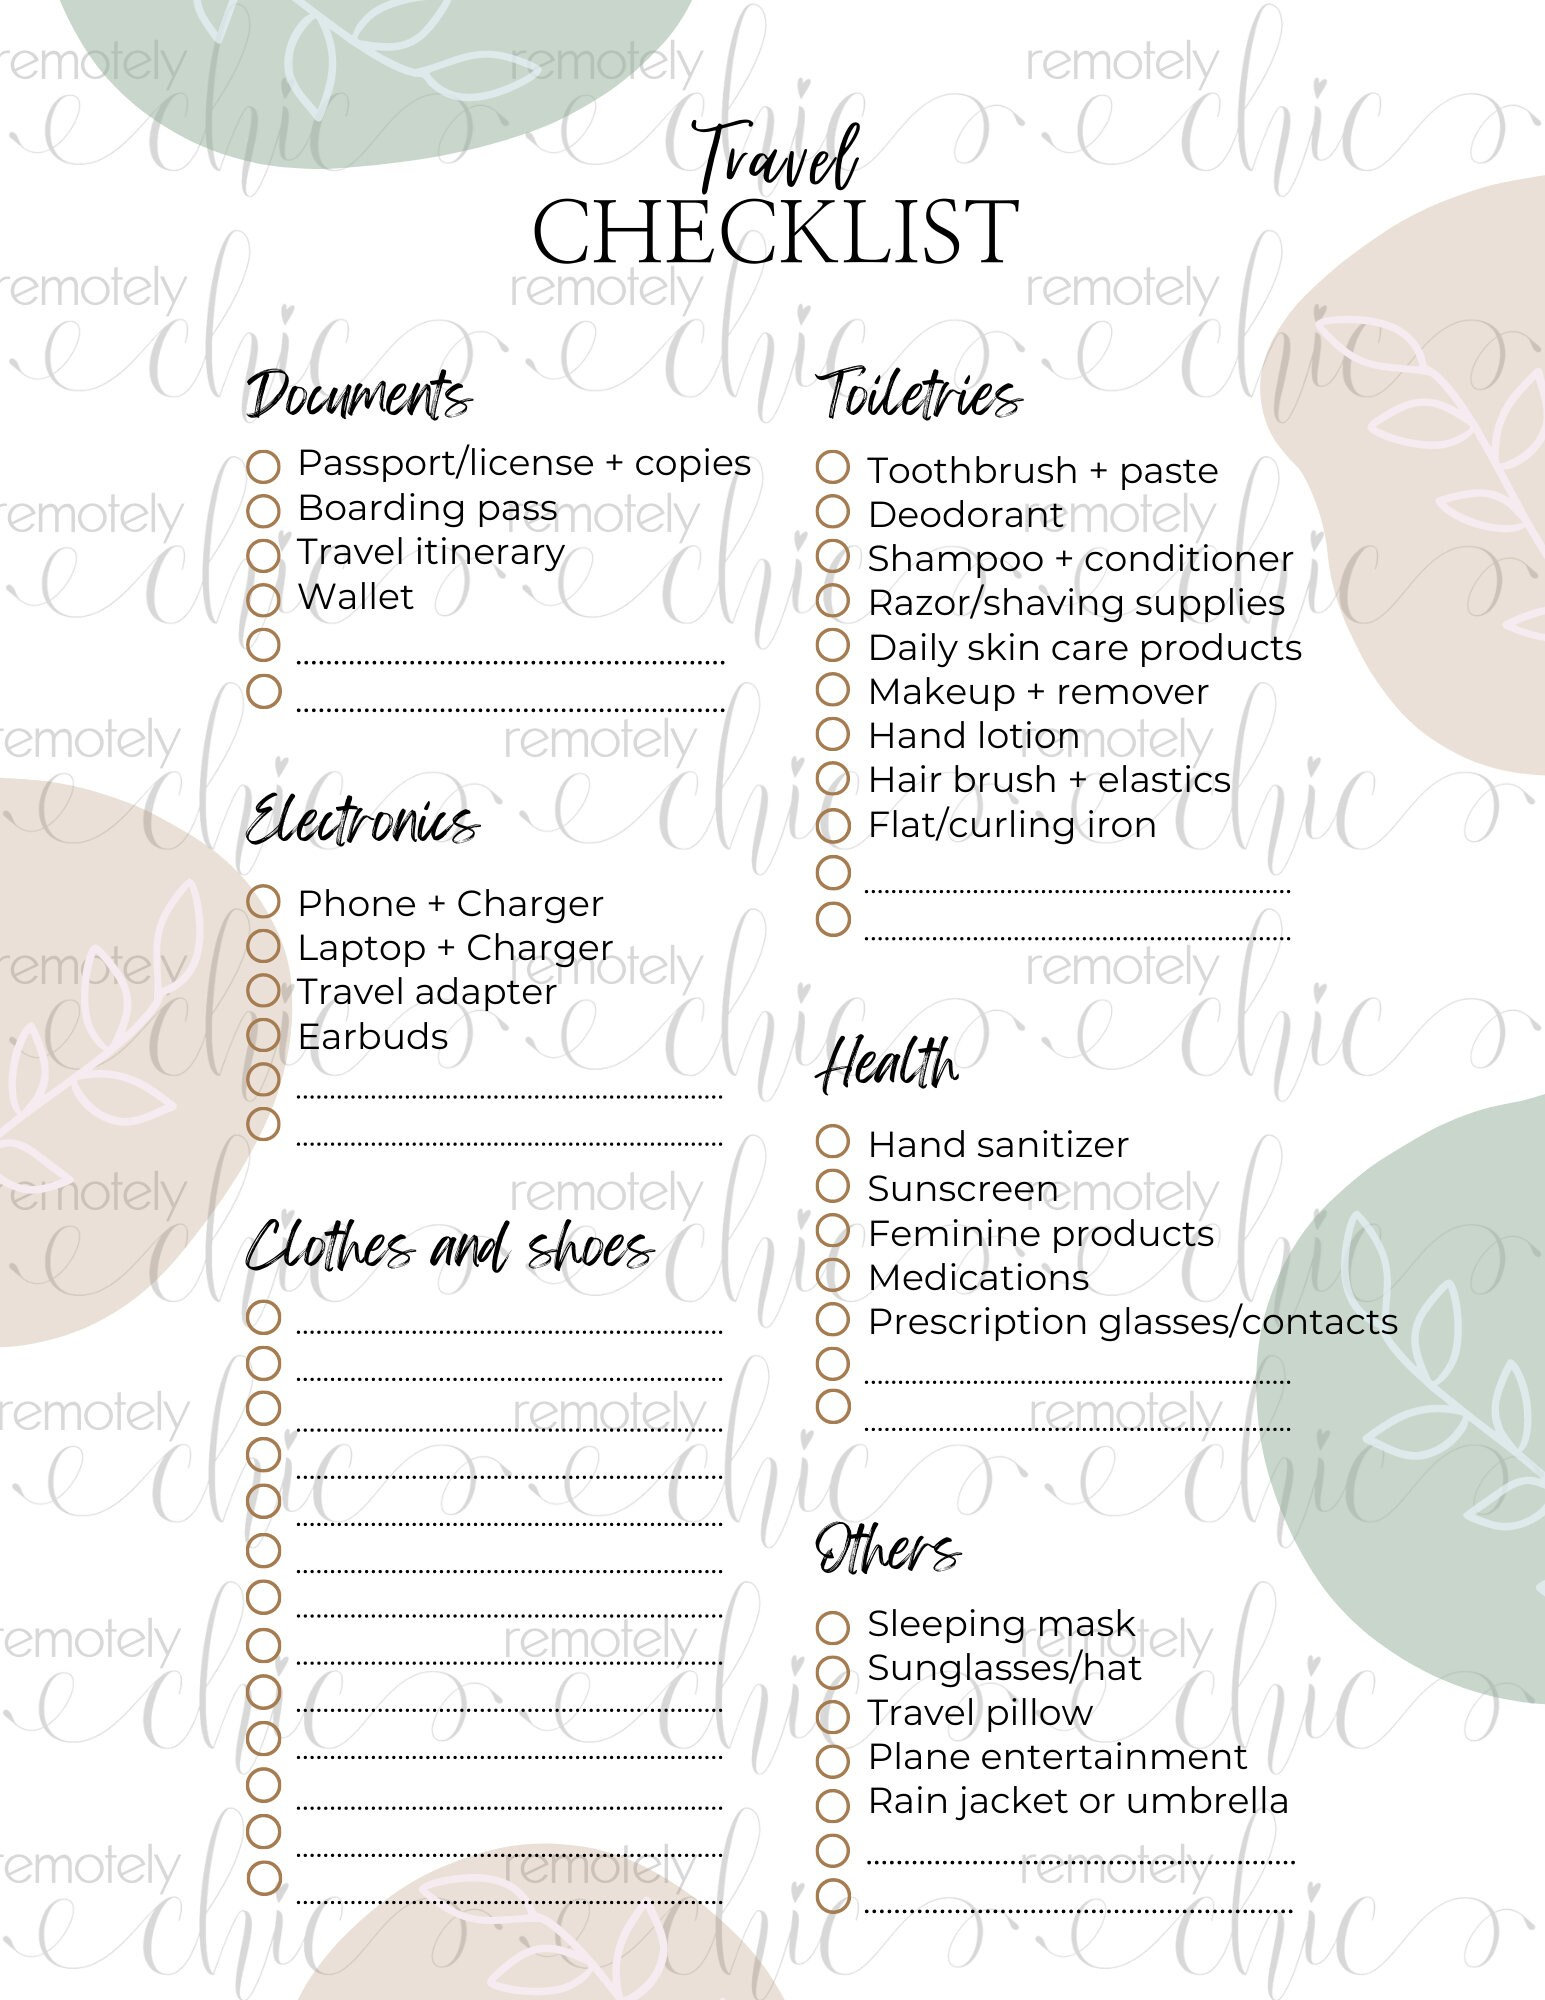 Travel Packing List Essential List With Blank Spaces for Additional ...